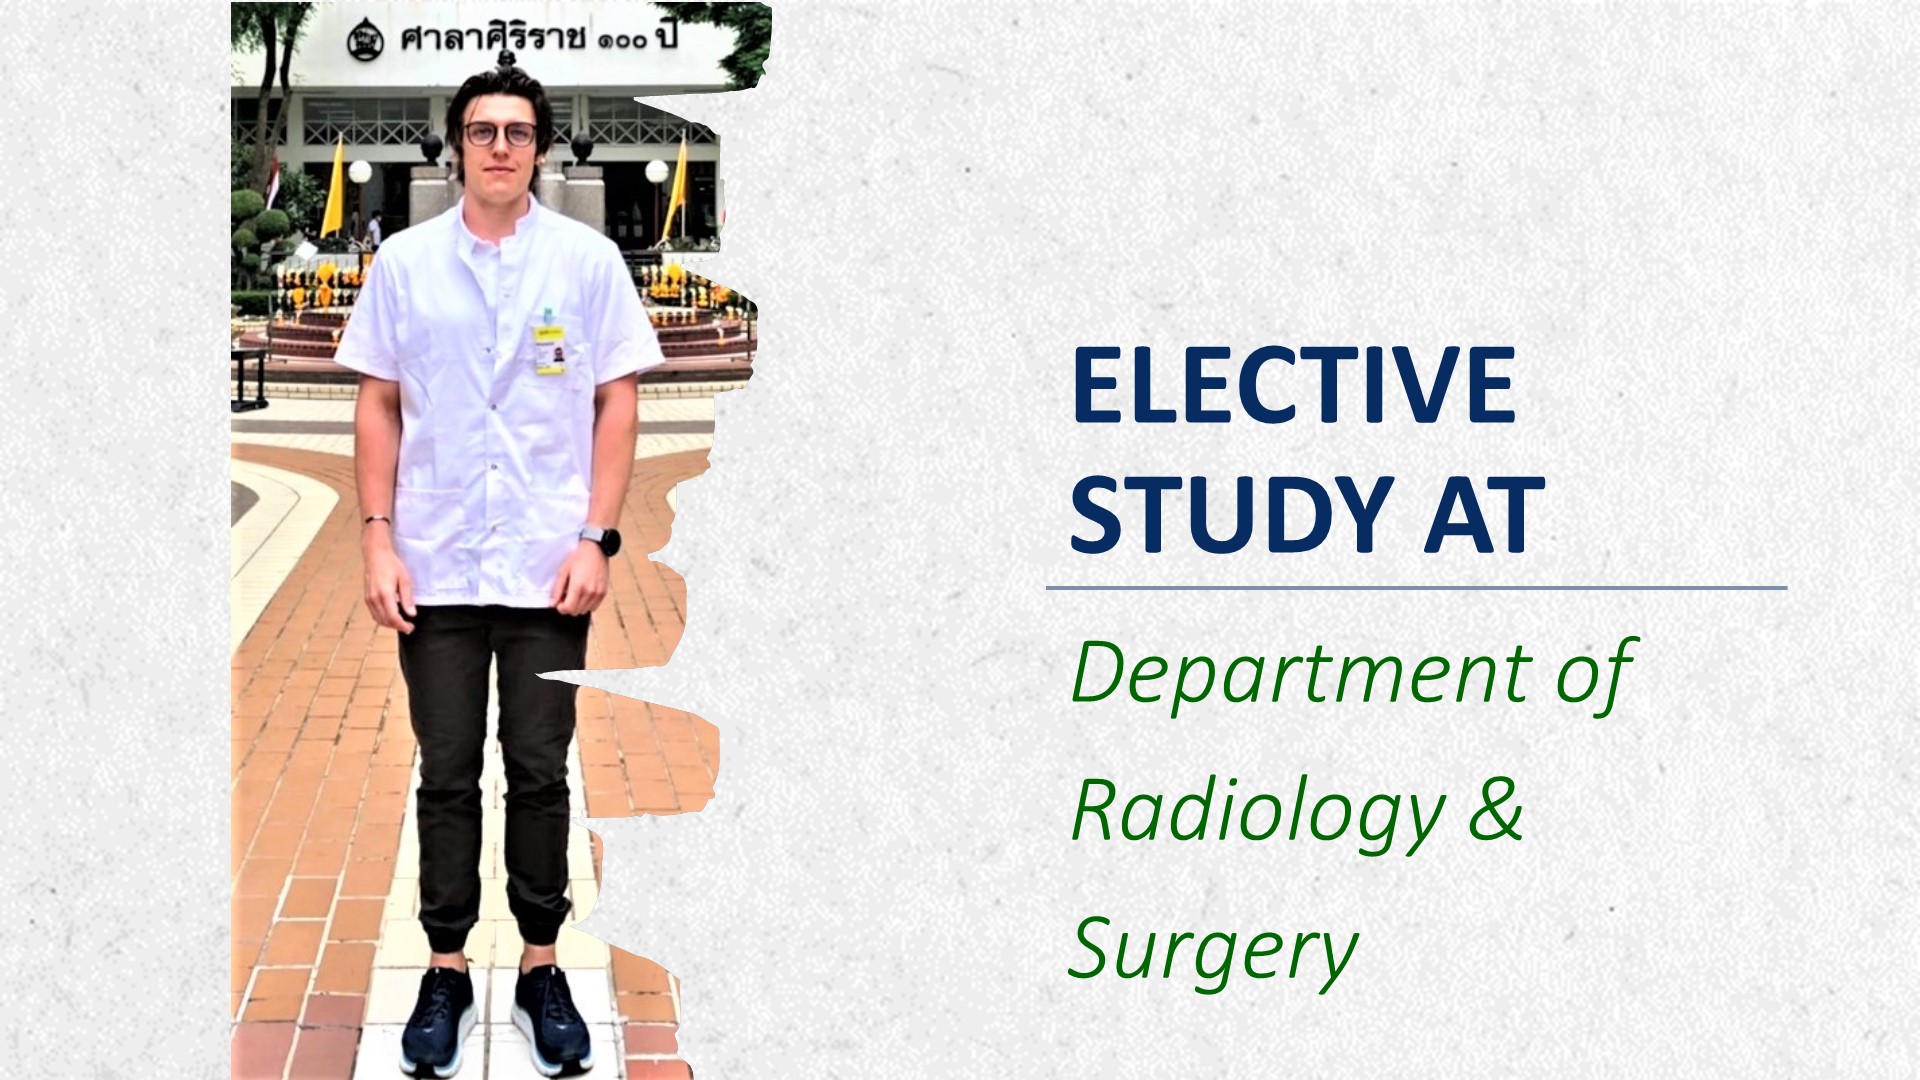 Elective Study at Dept. of Radiology & Surgery